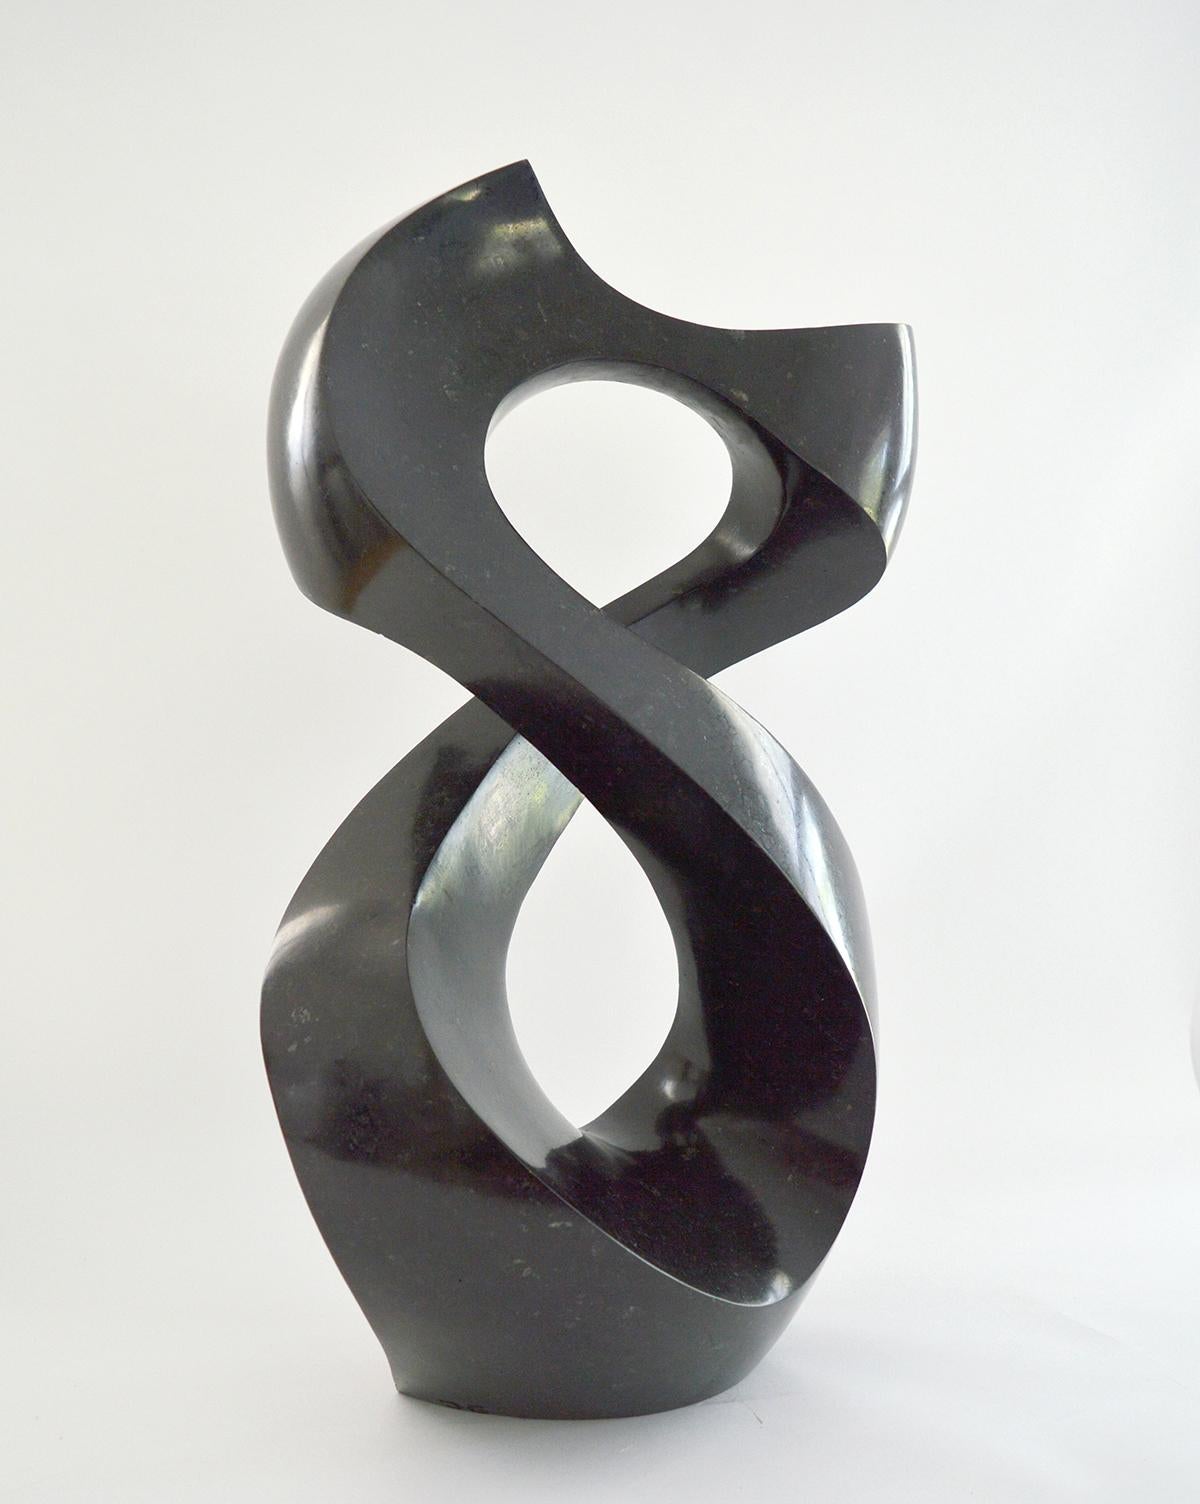 Halcyon Black 7/50 - dark, smooth, polished, abstract, black granite sculpture - Sculpture by Jeremy Guy